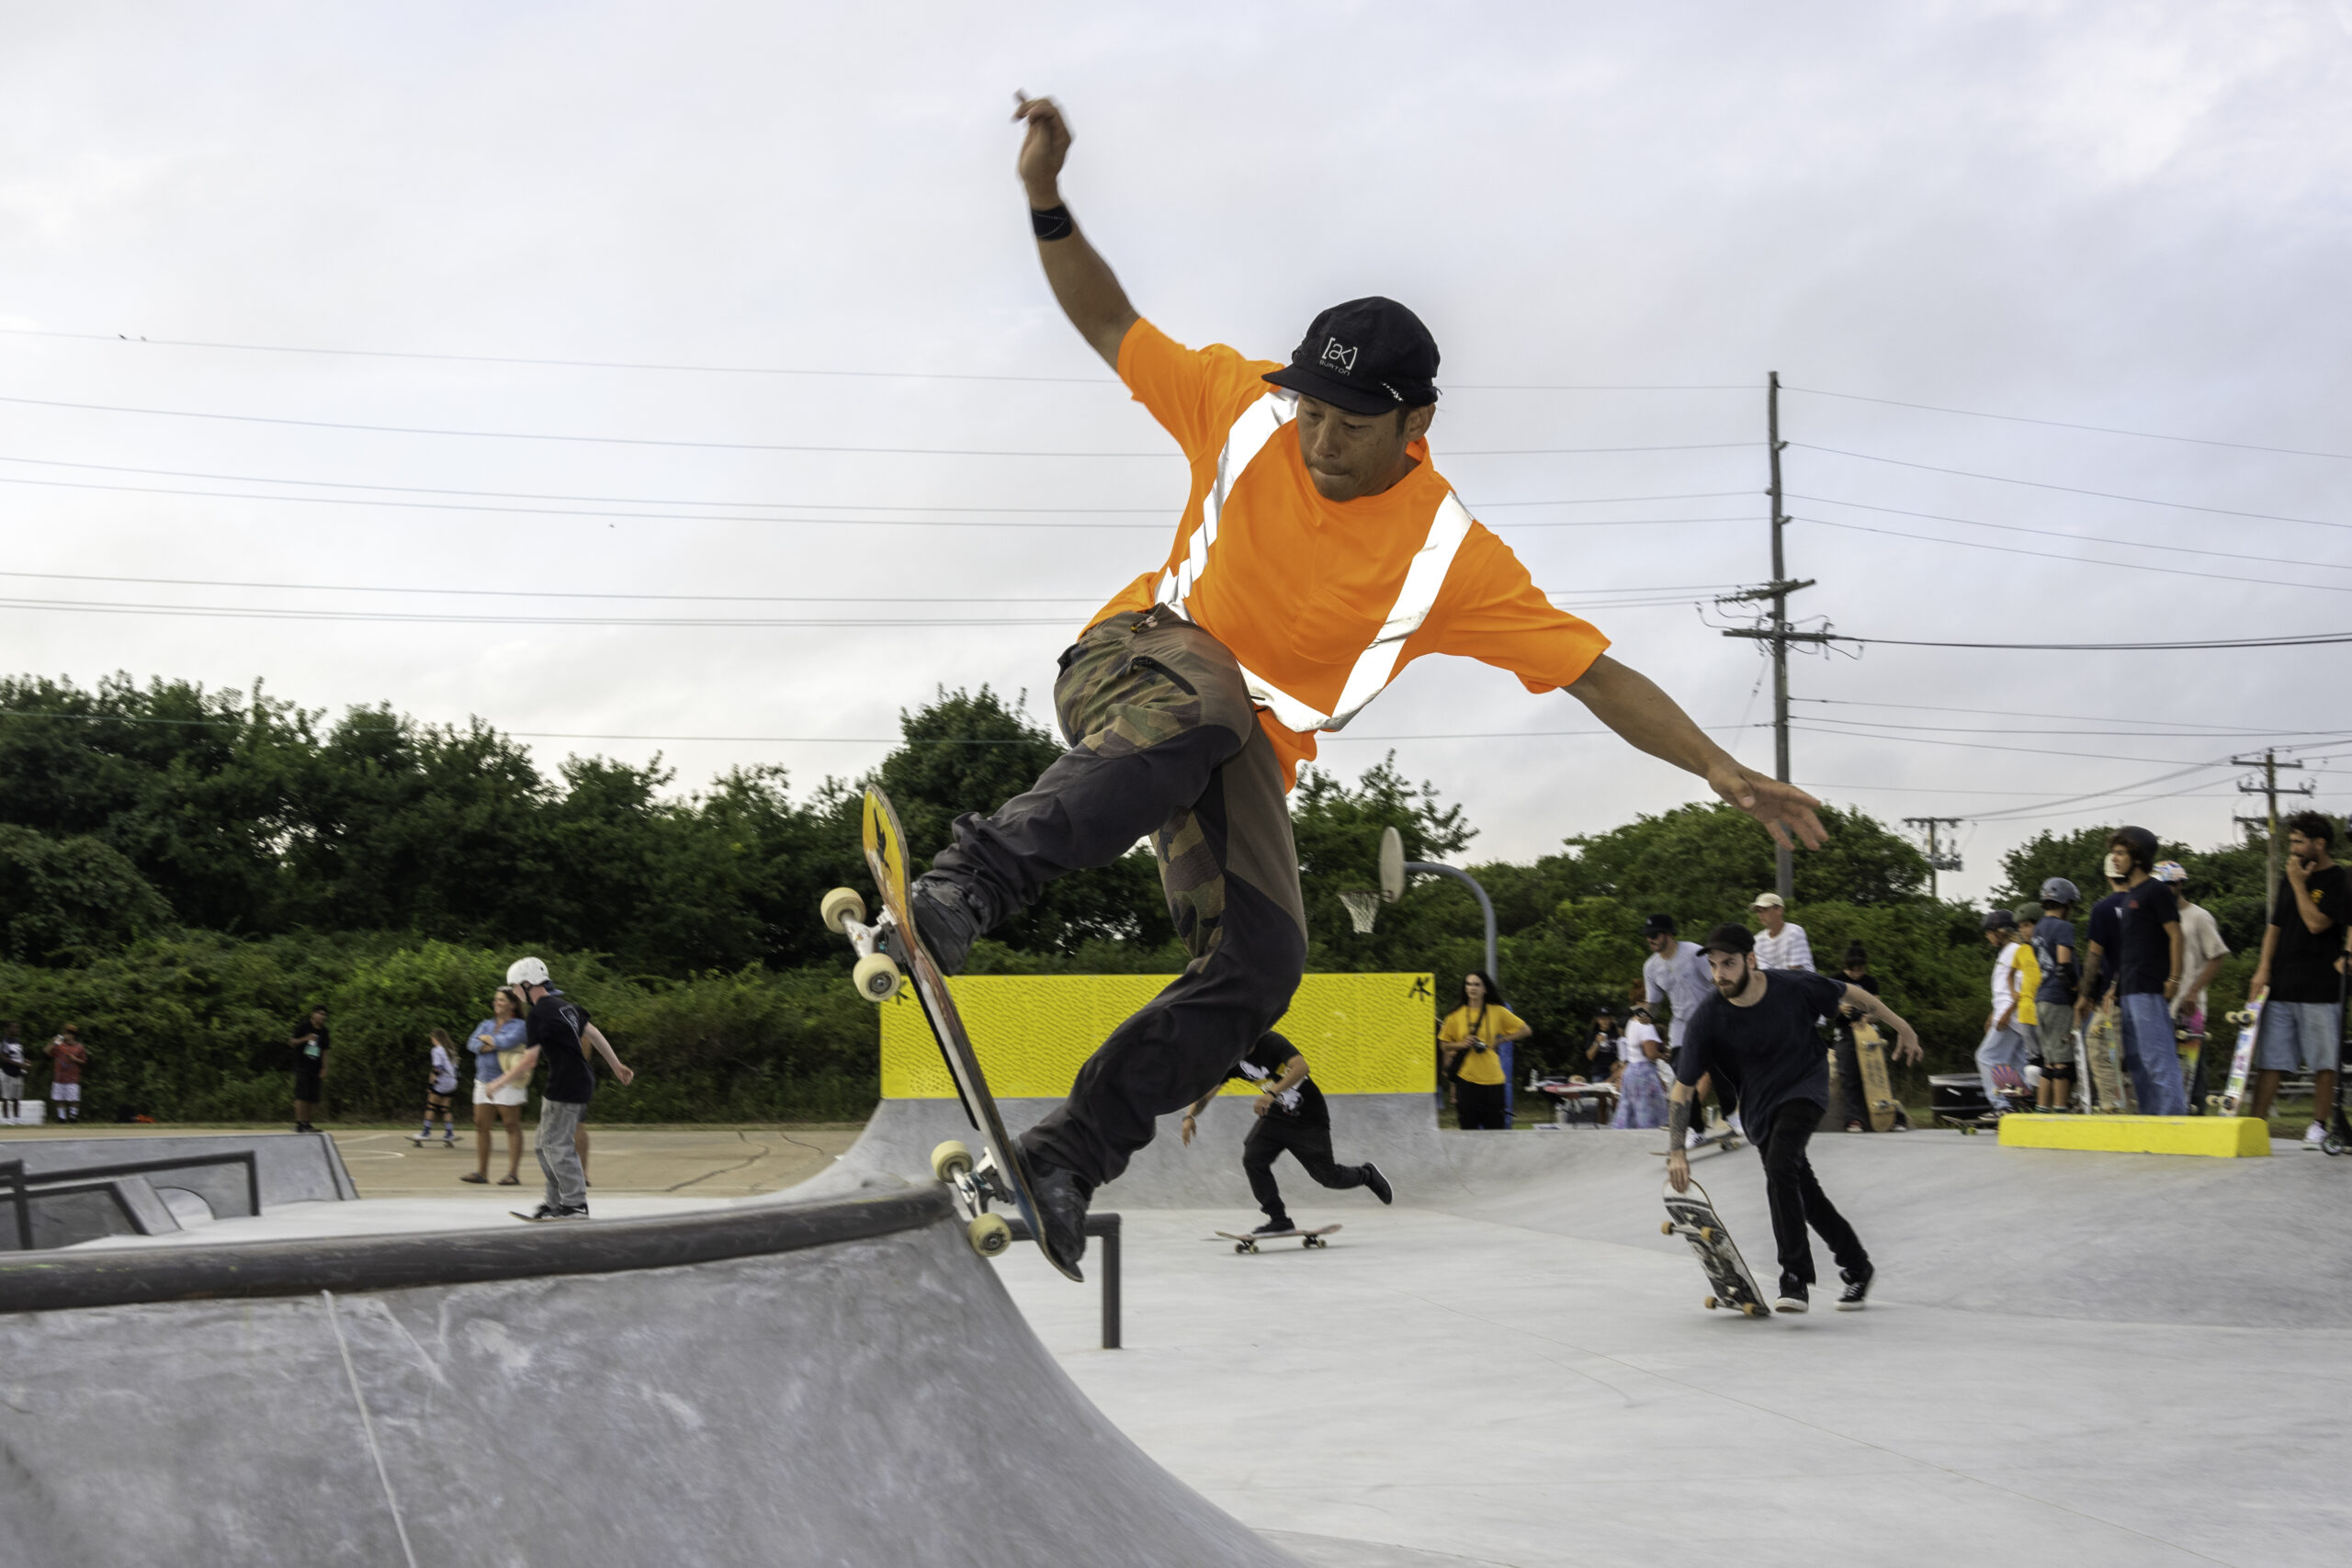 The Montauk community, as well as many visitors from across Long Island and New York City, came to skate and celebrate at the grand opening of the Montauk Skate Park on Friday. RON ESPOSITO PHOTOS